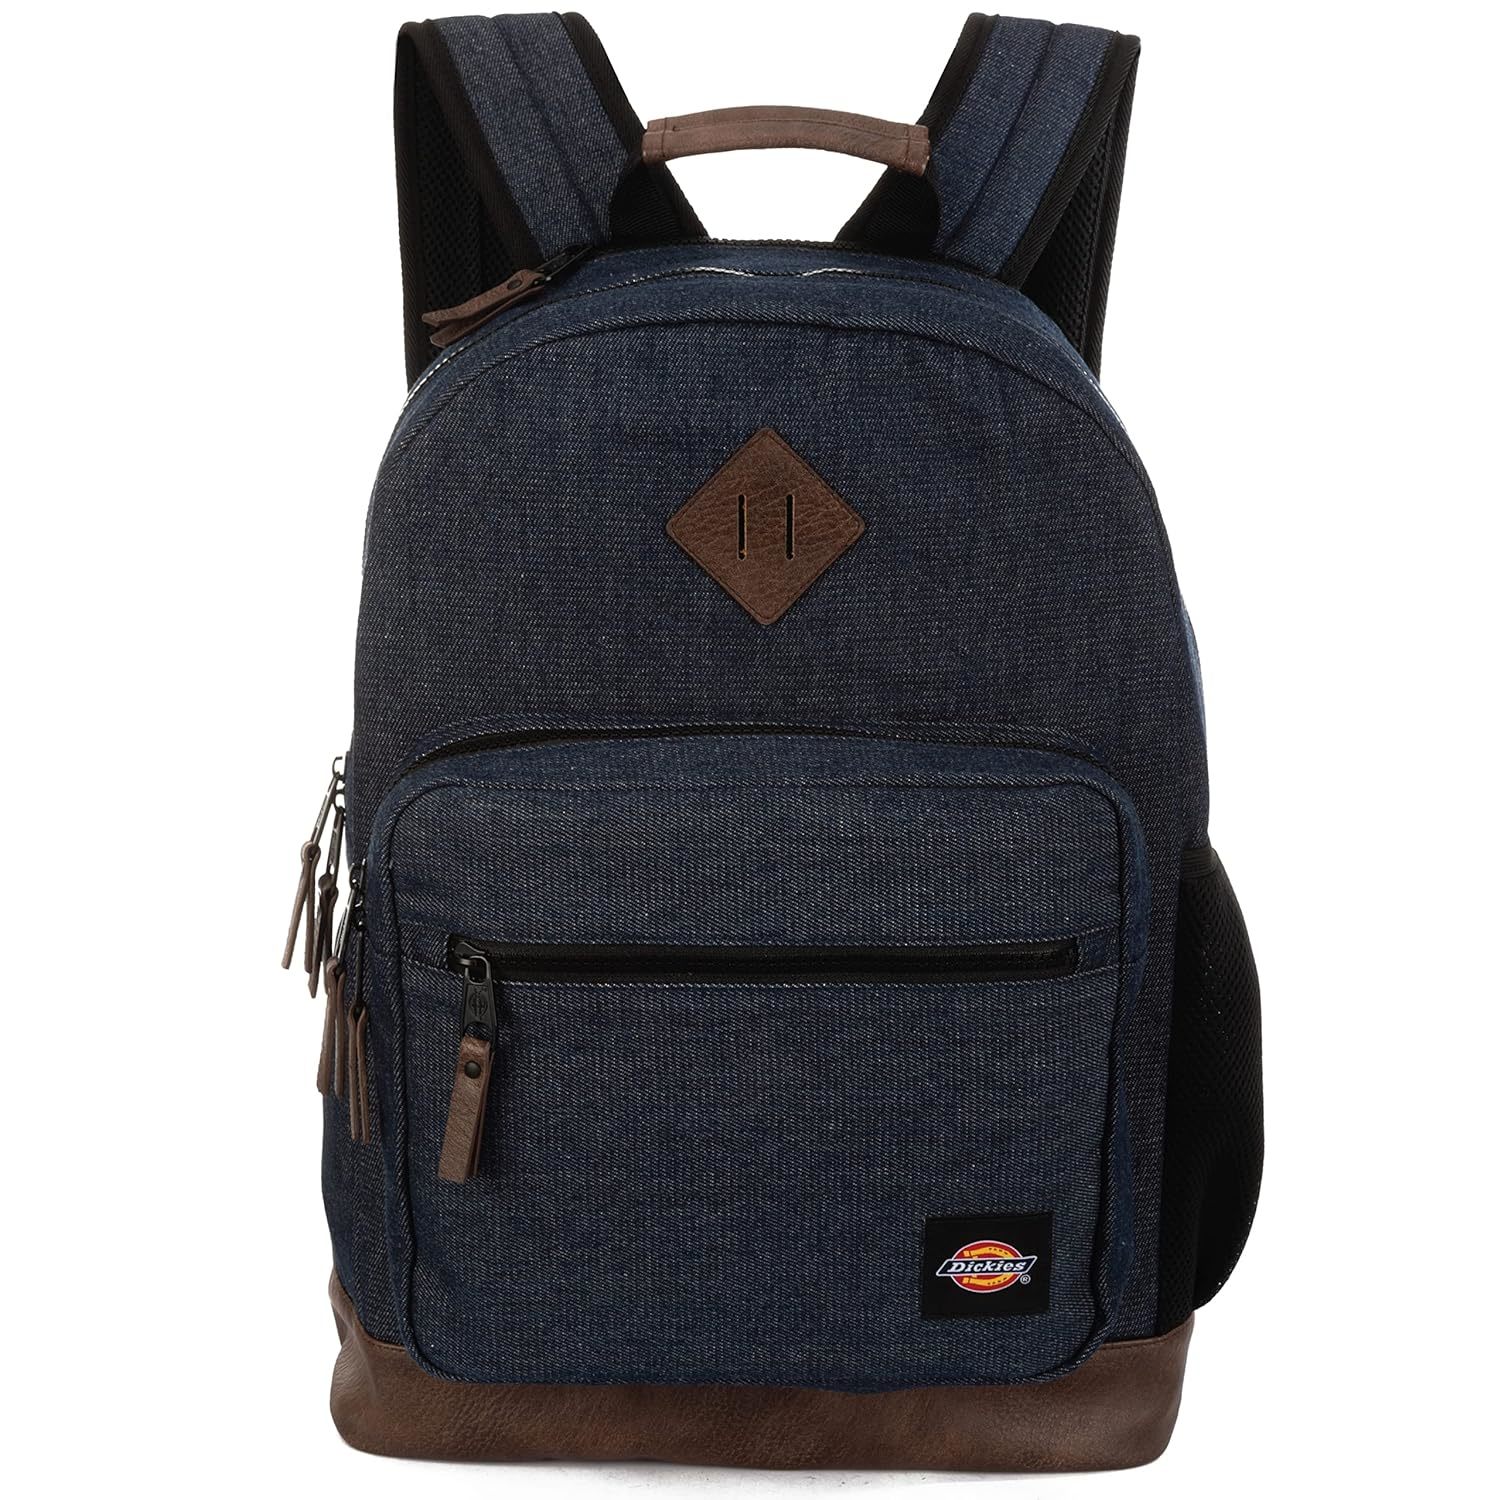 Primary image for DICKIES Signature Backpack for School Classic Logo Water Resistant Casual Daypac